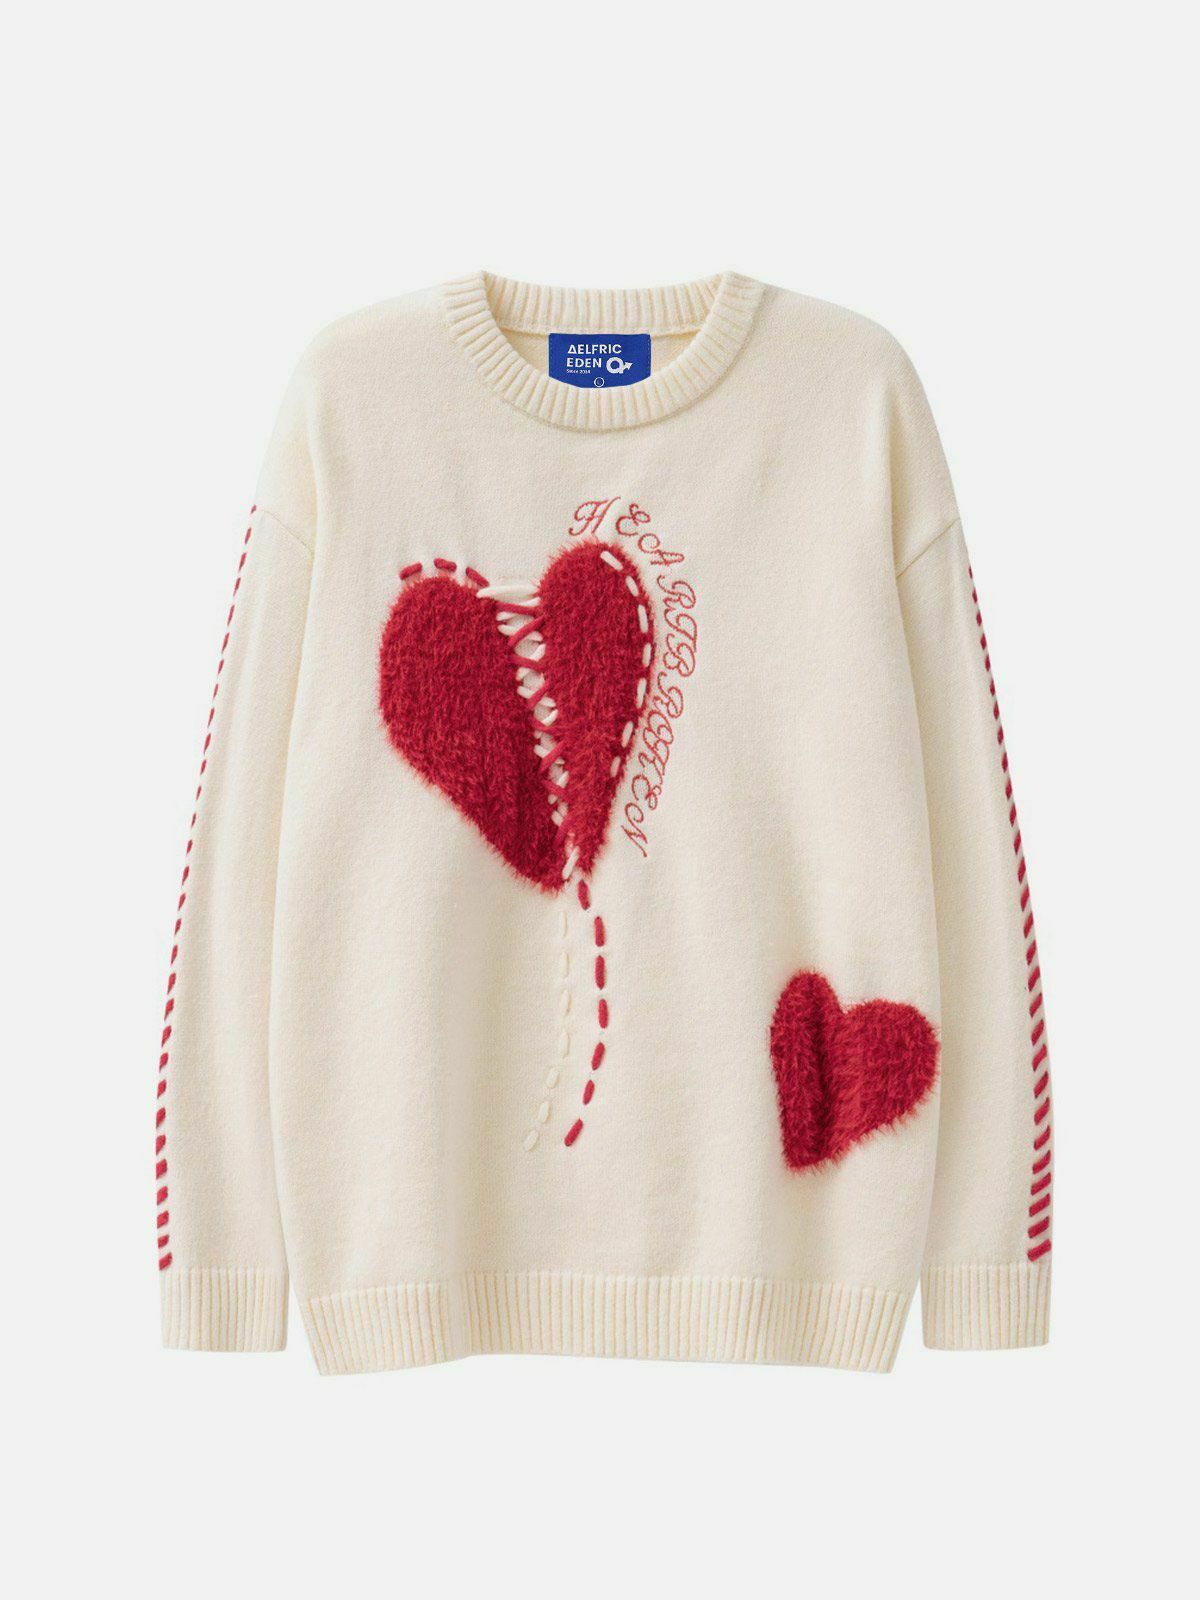 chic flocking heart sweater   youthful urban appeal 7337